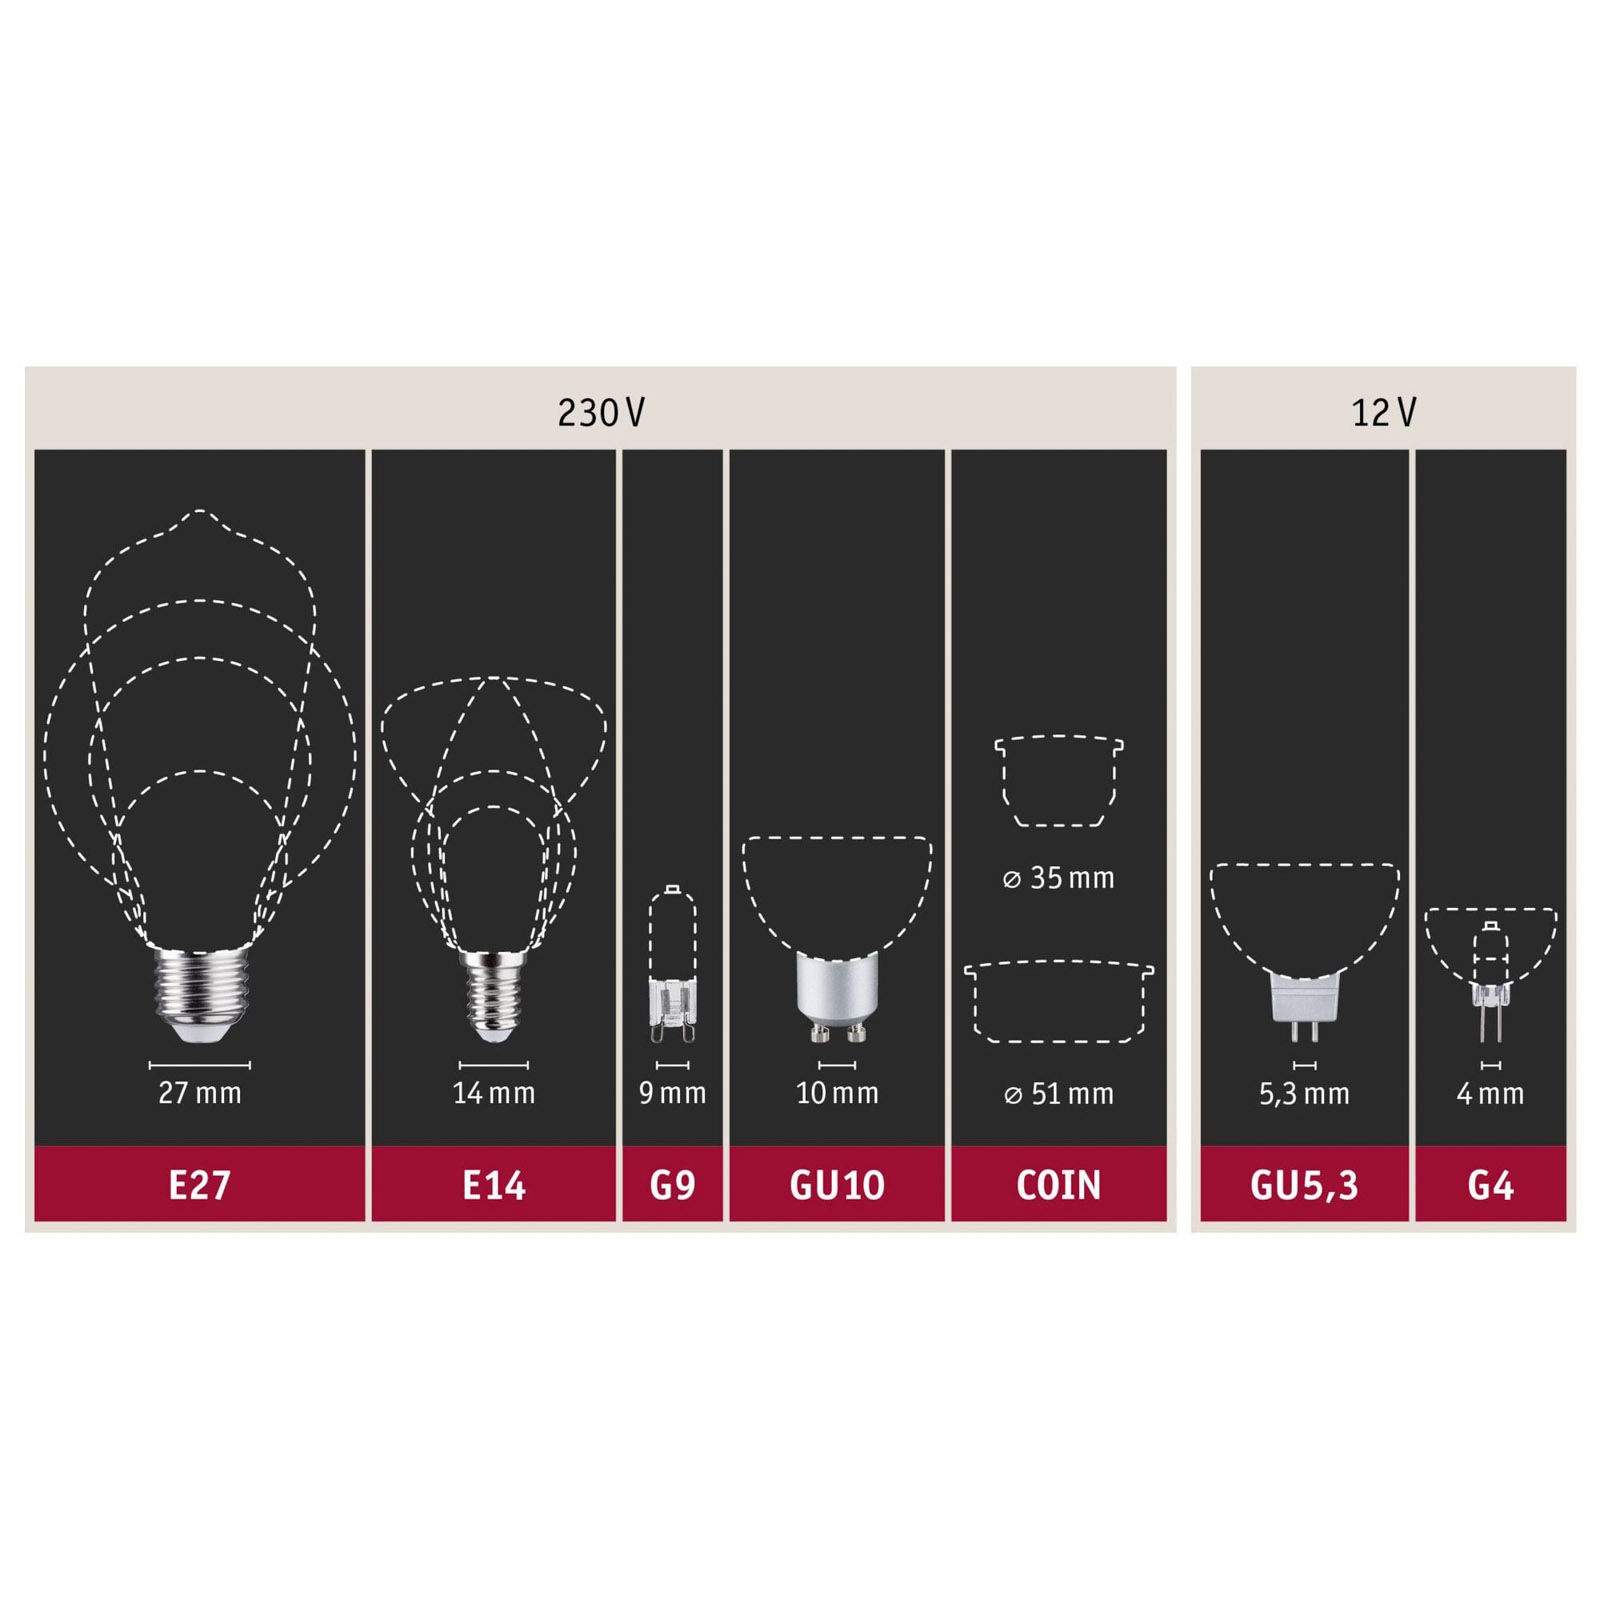 E27 LED bulb 9W filament 2,700K clear dimmable